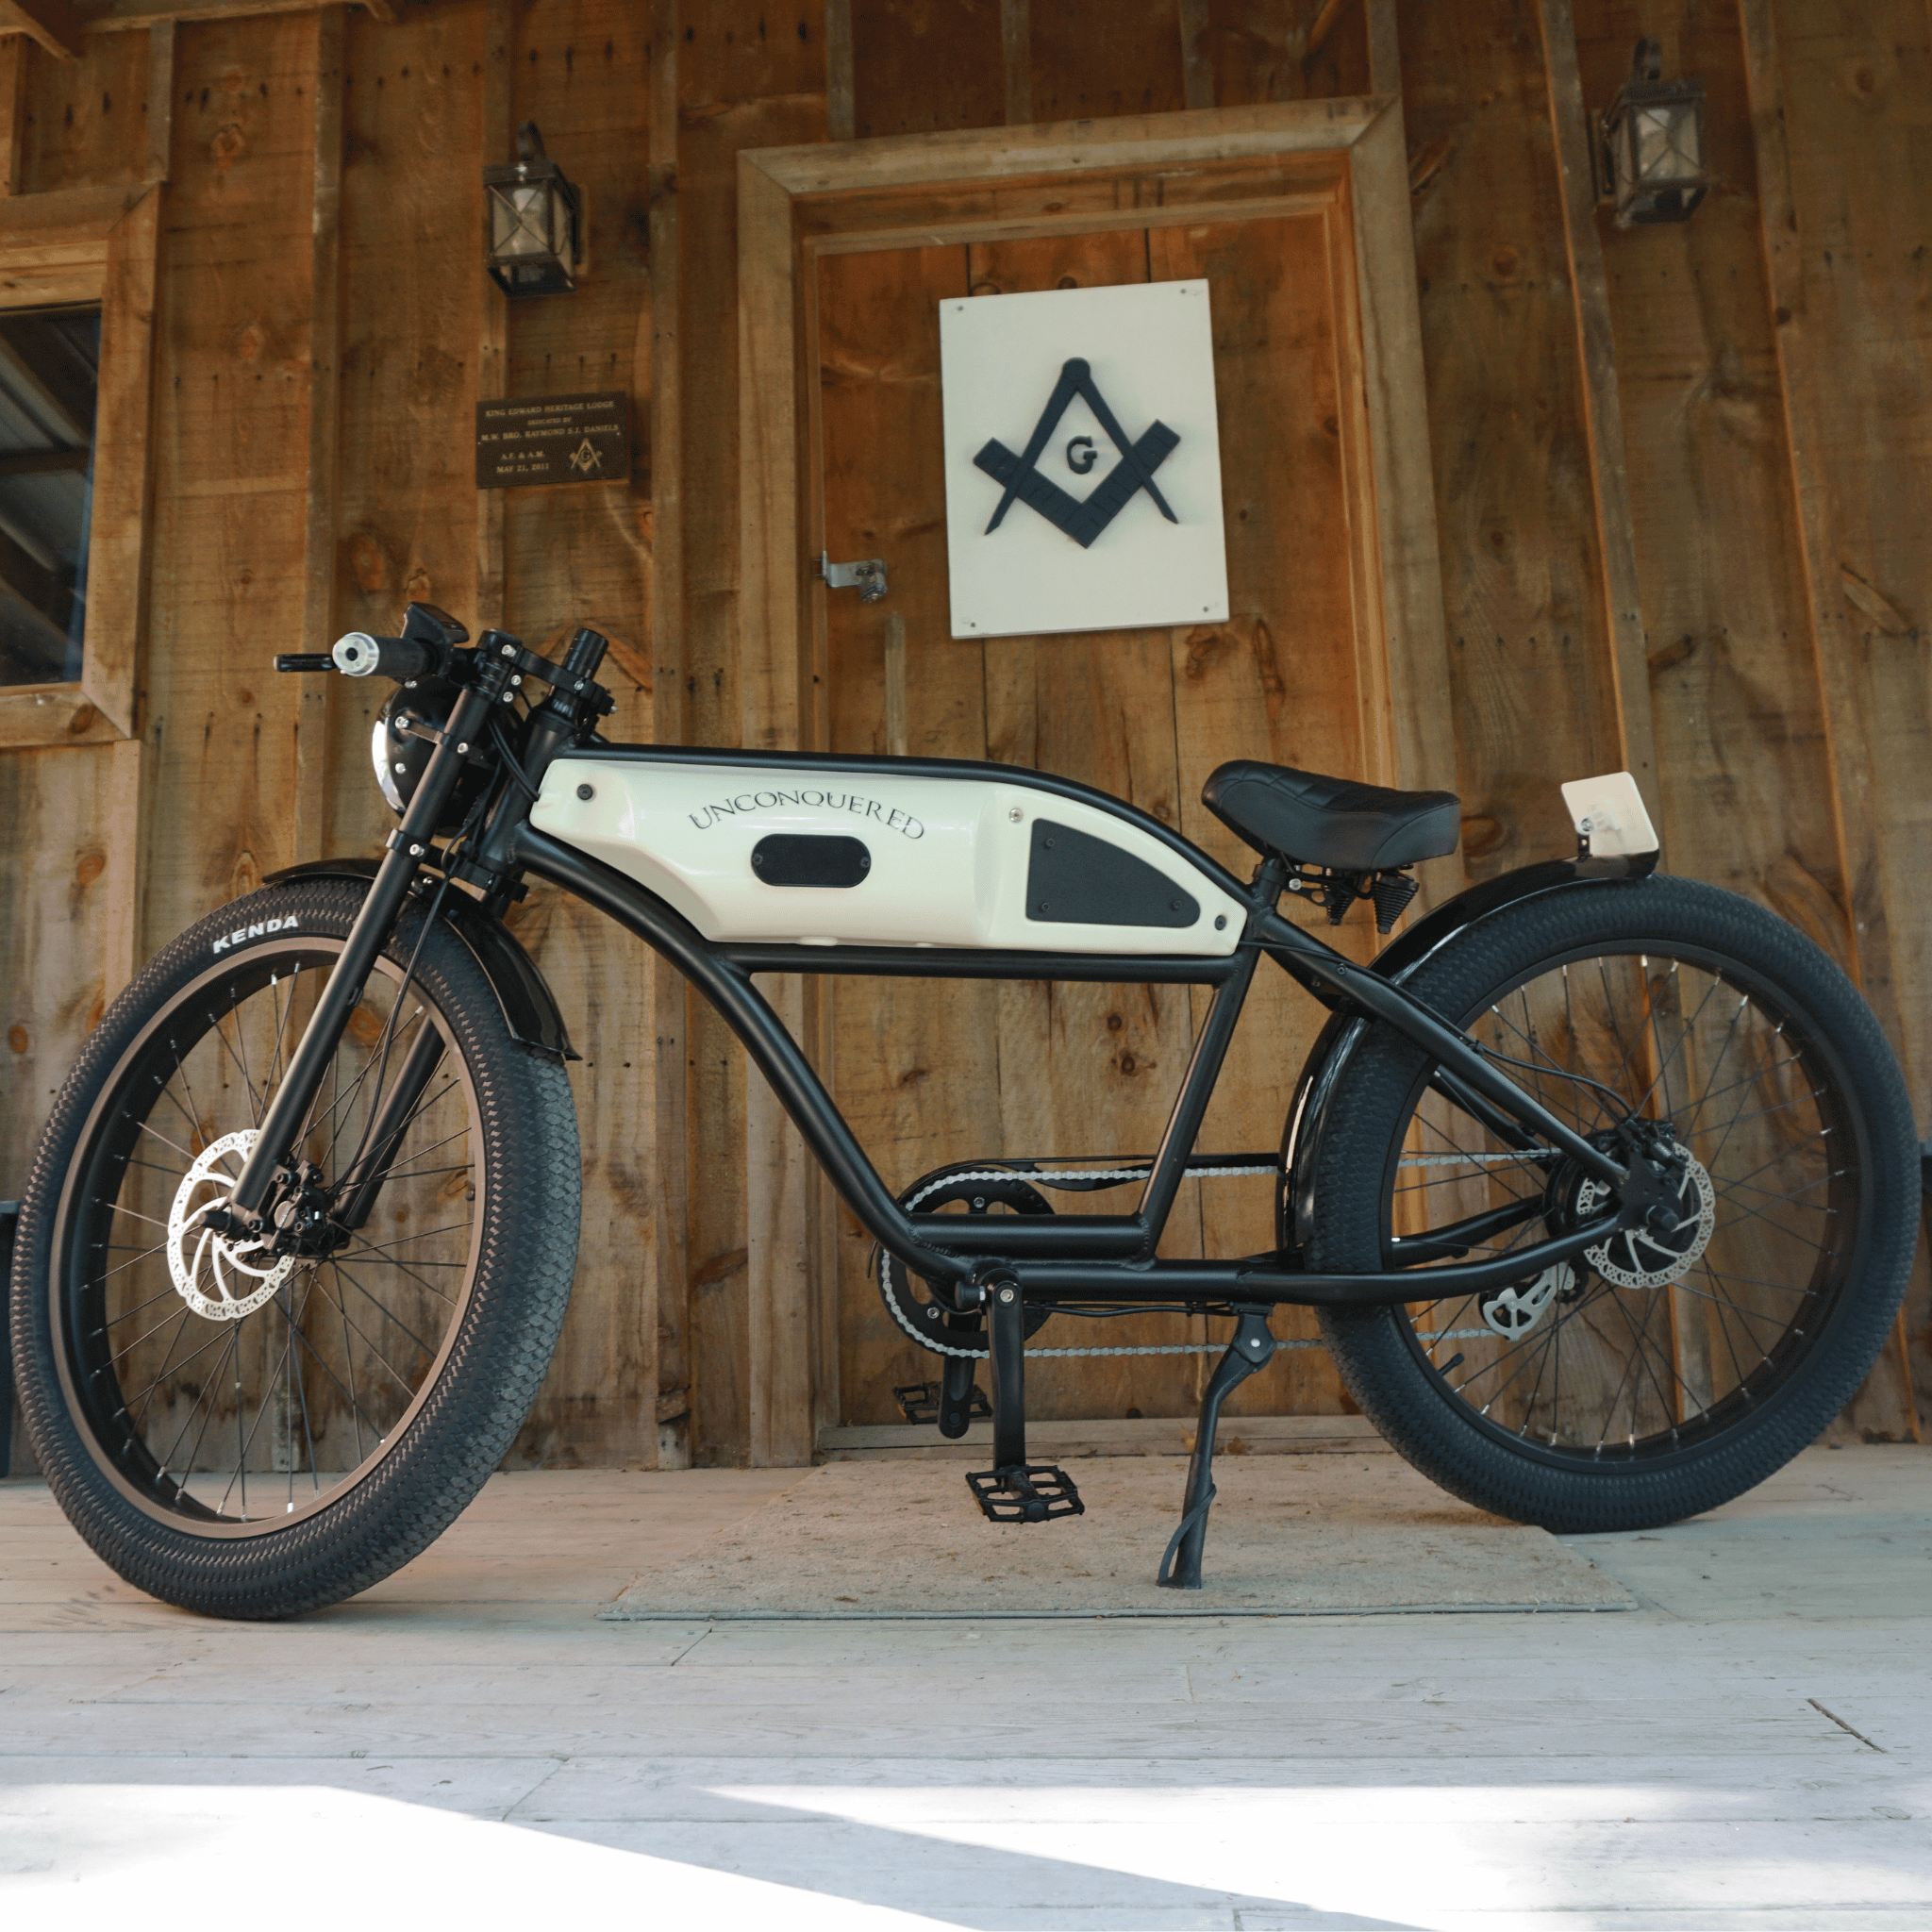 Searching for a cheap electric bike built to last?